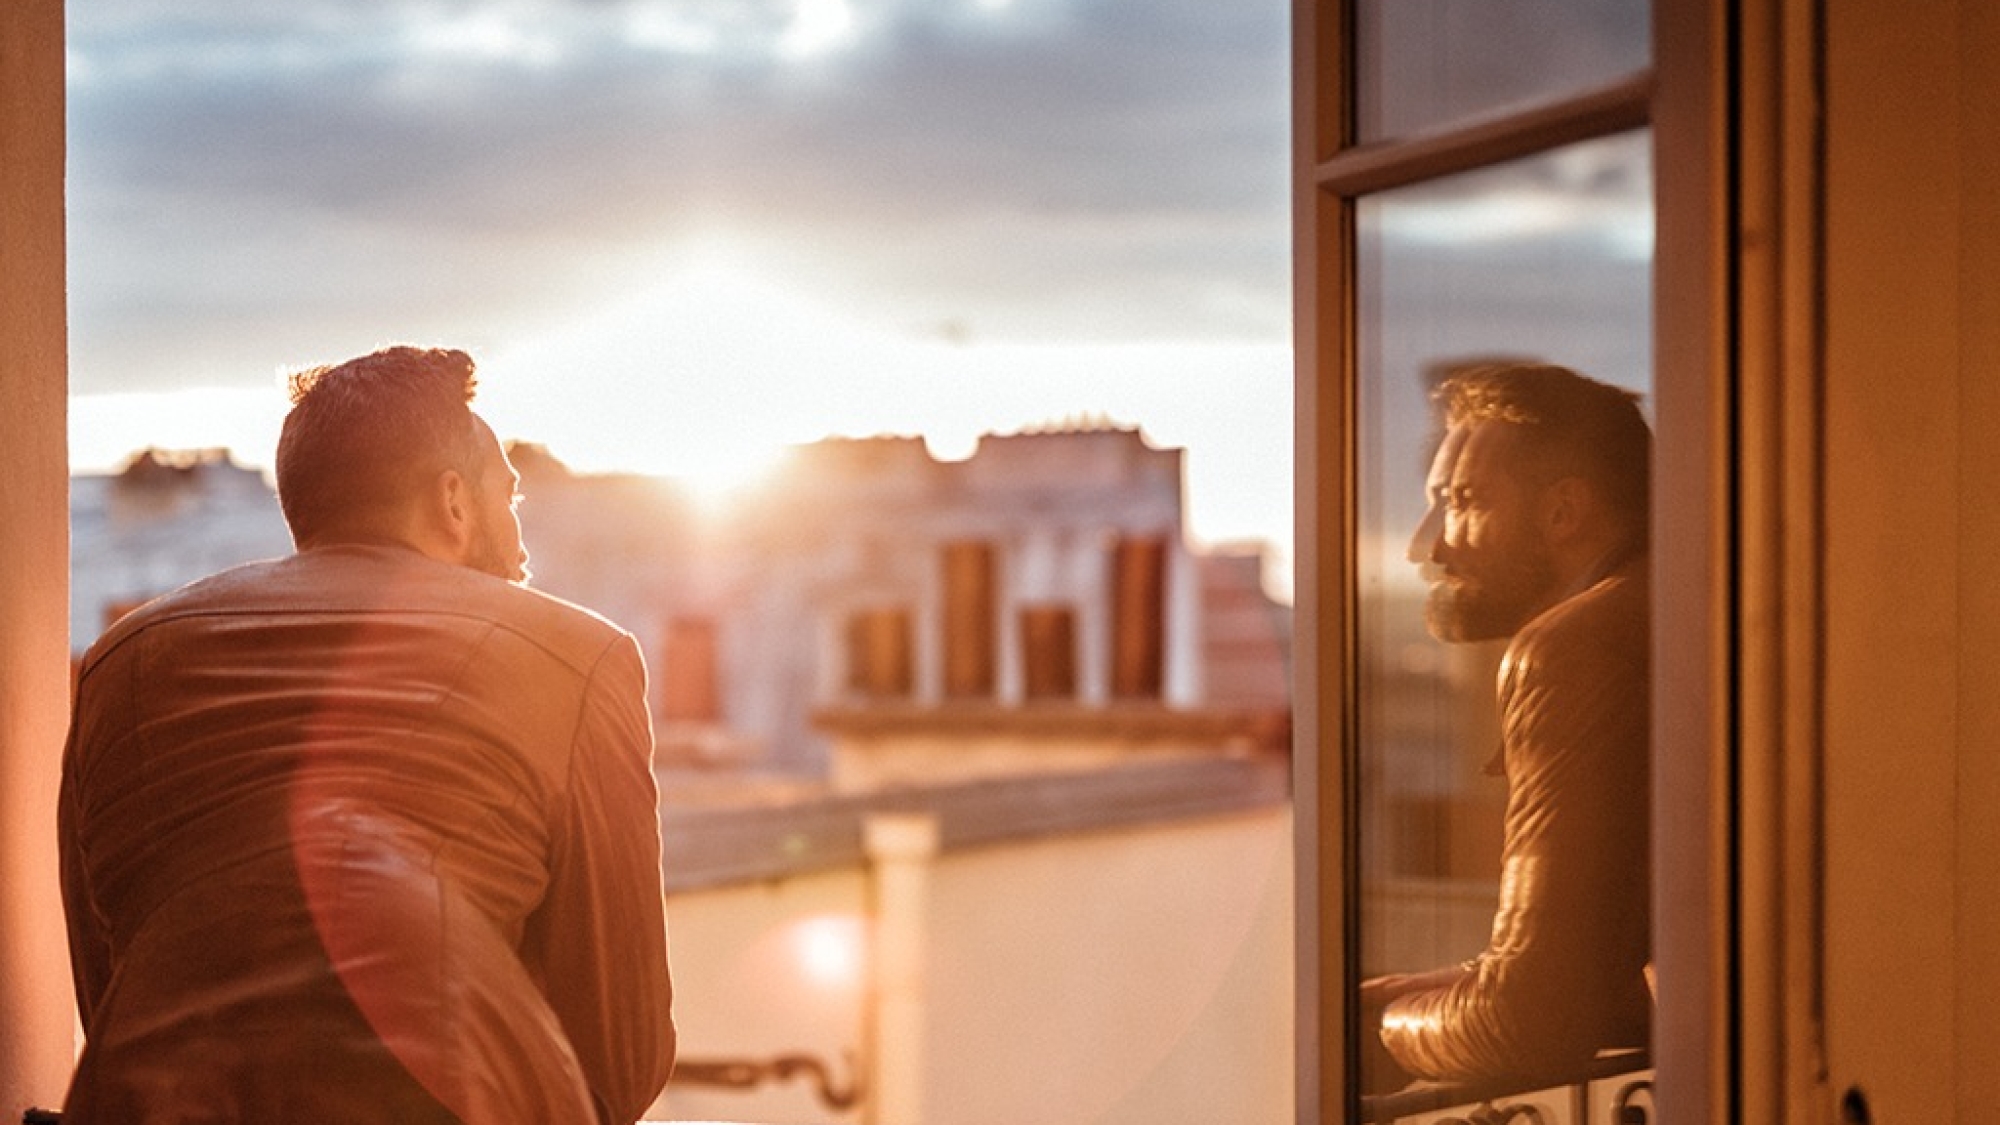 bearded man looking out over the city at sunrise and reflecting himself in window glass